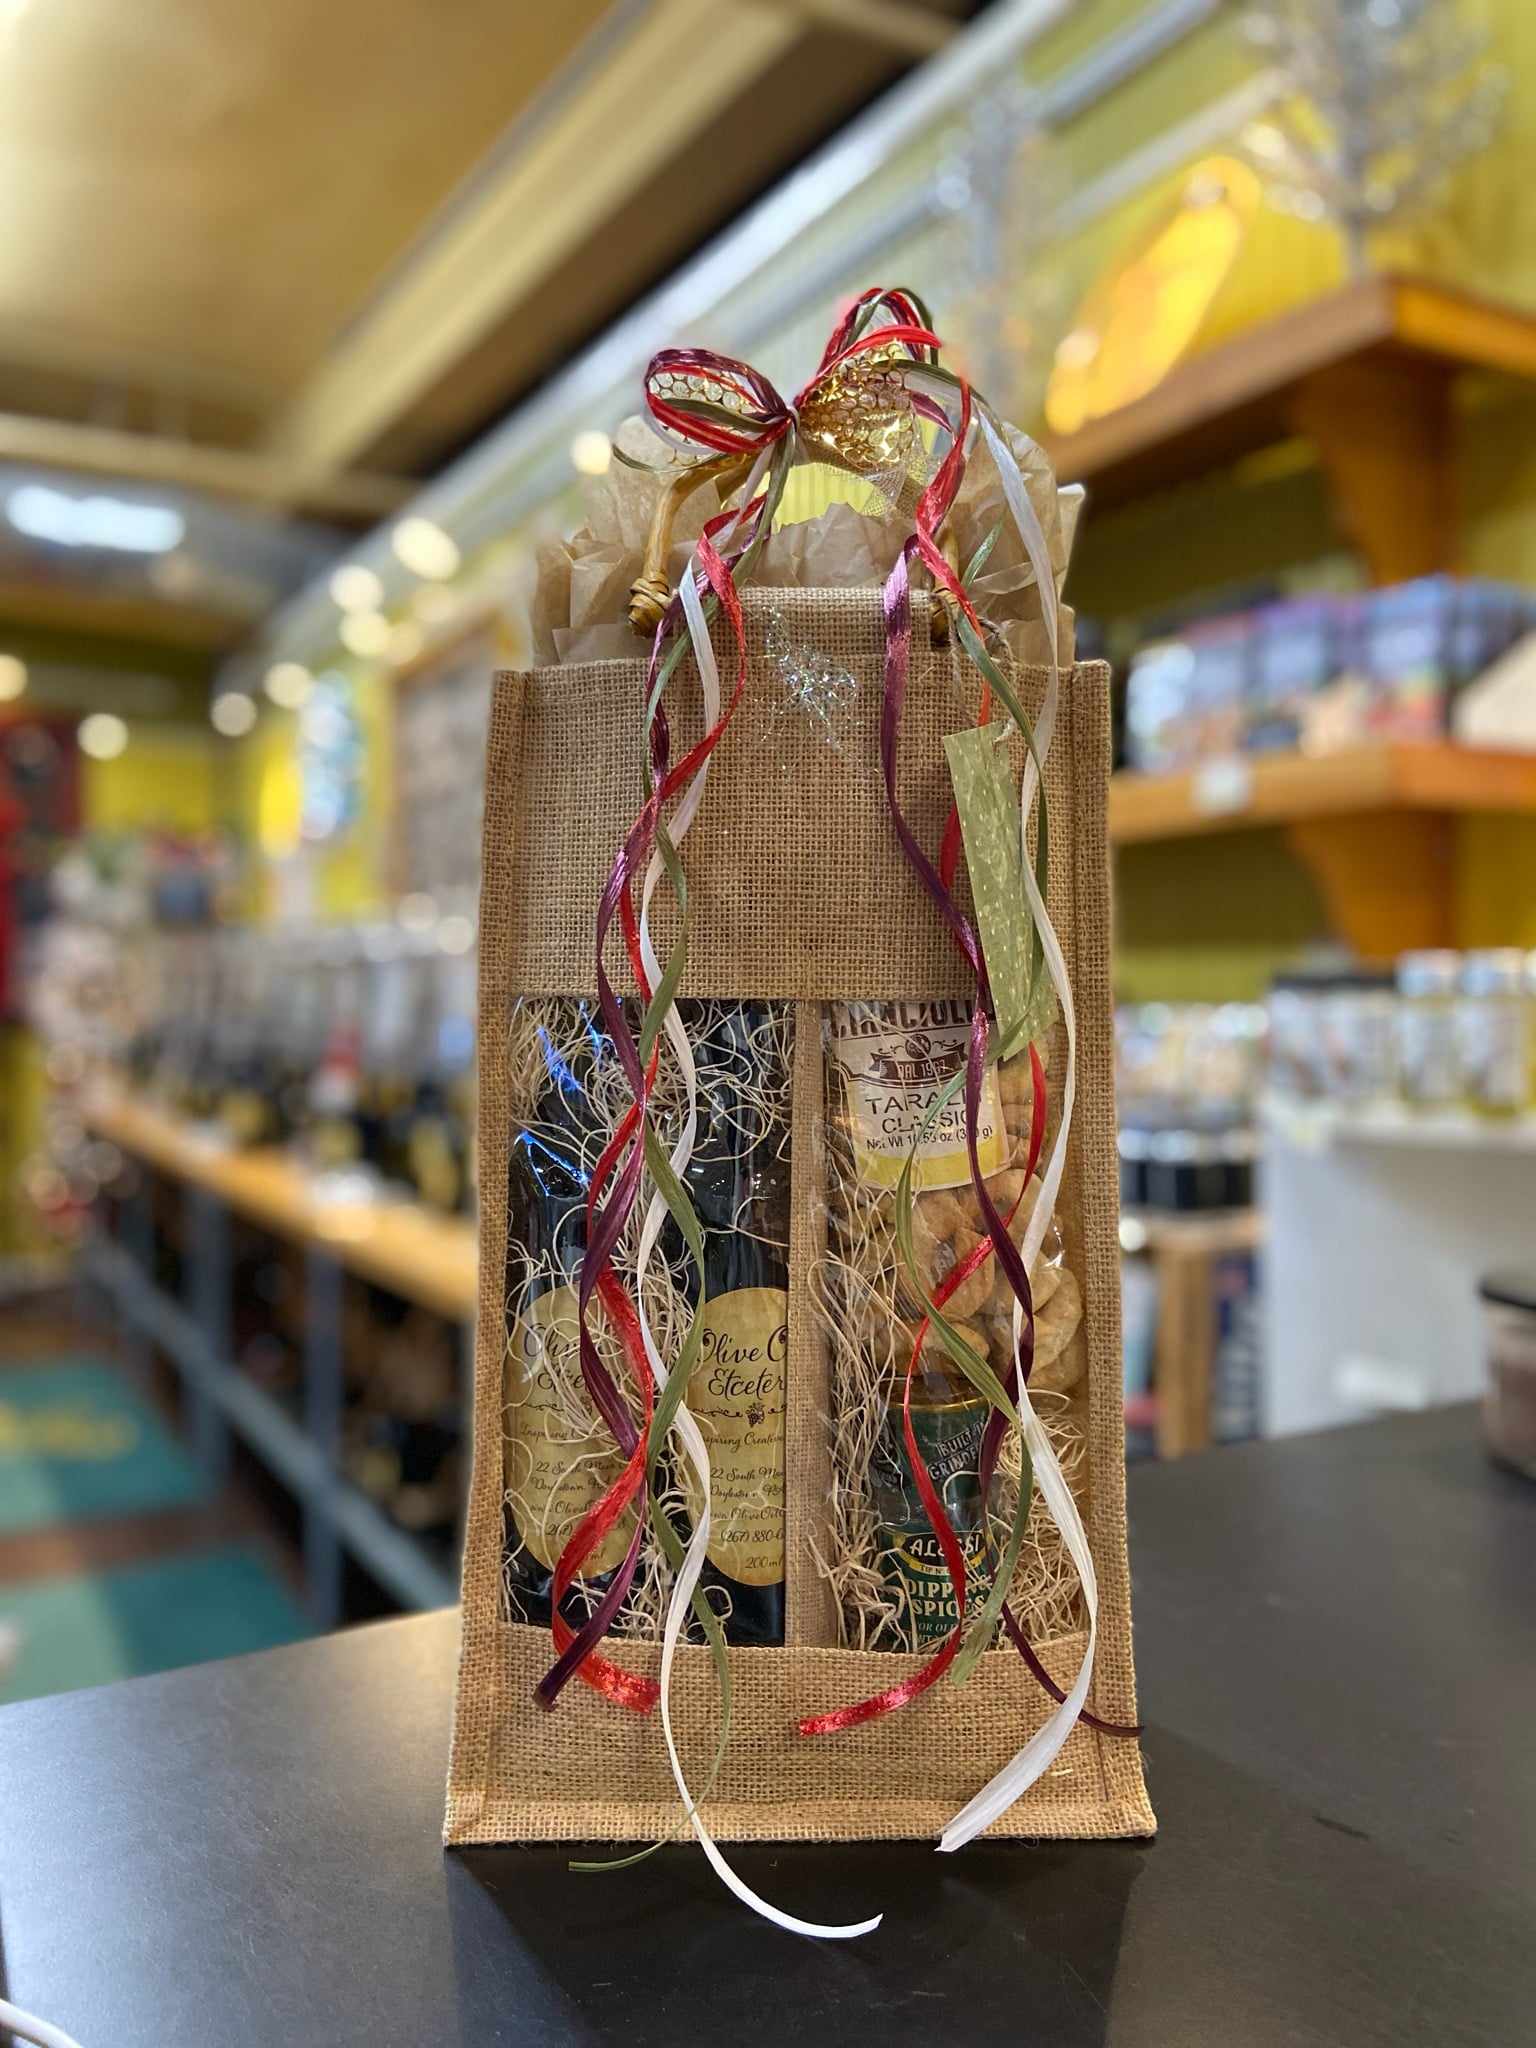 Christmas Holiday Burlap bag filled with a selection of oil and balsamic vinegar, crackers and dipping spice blend 